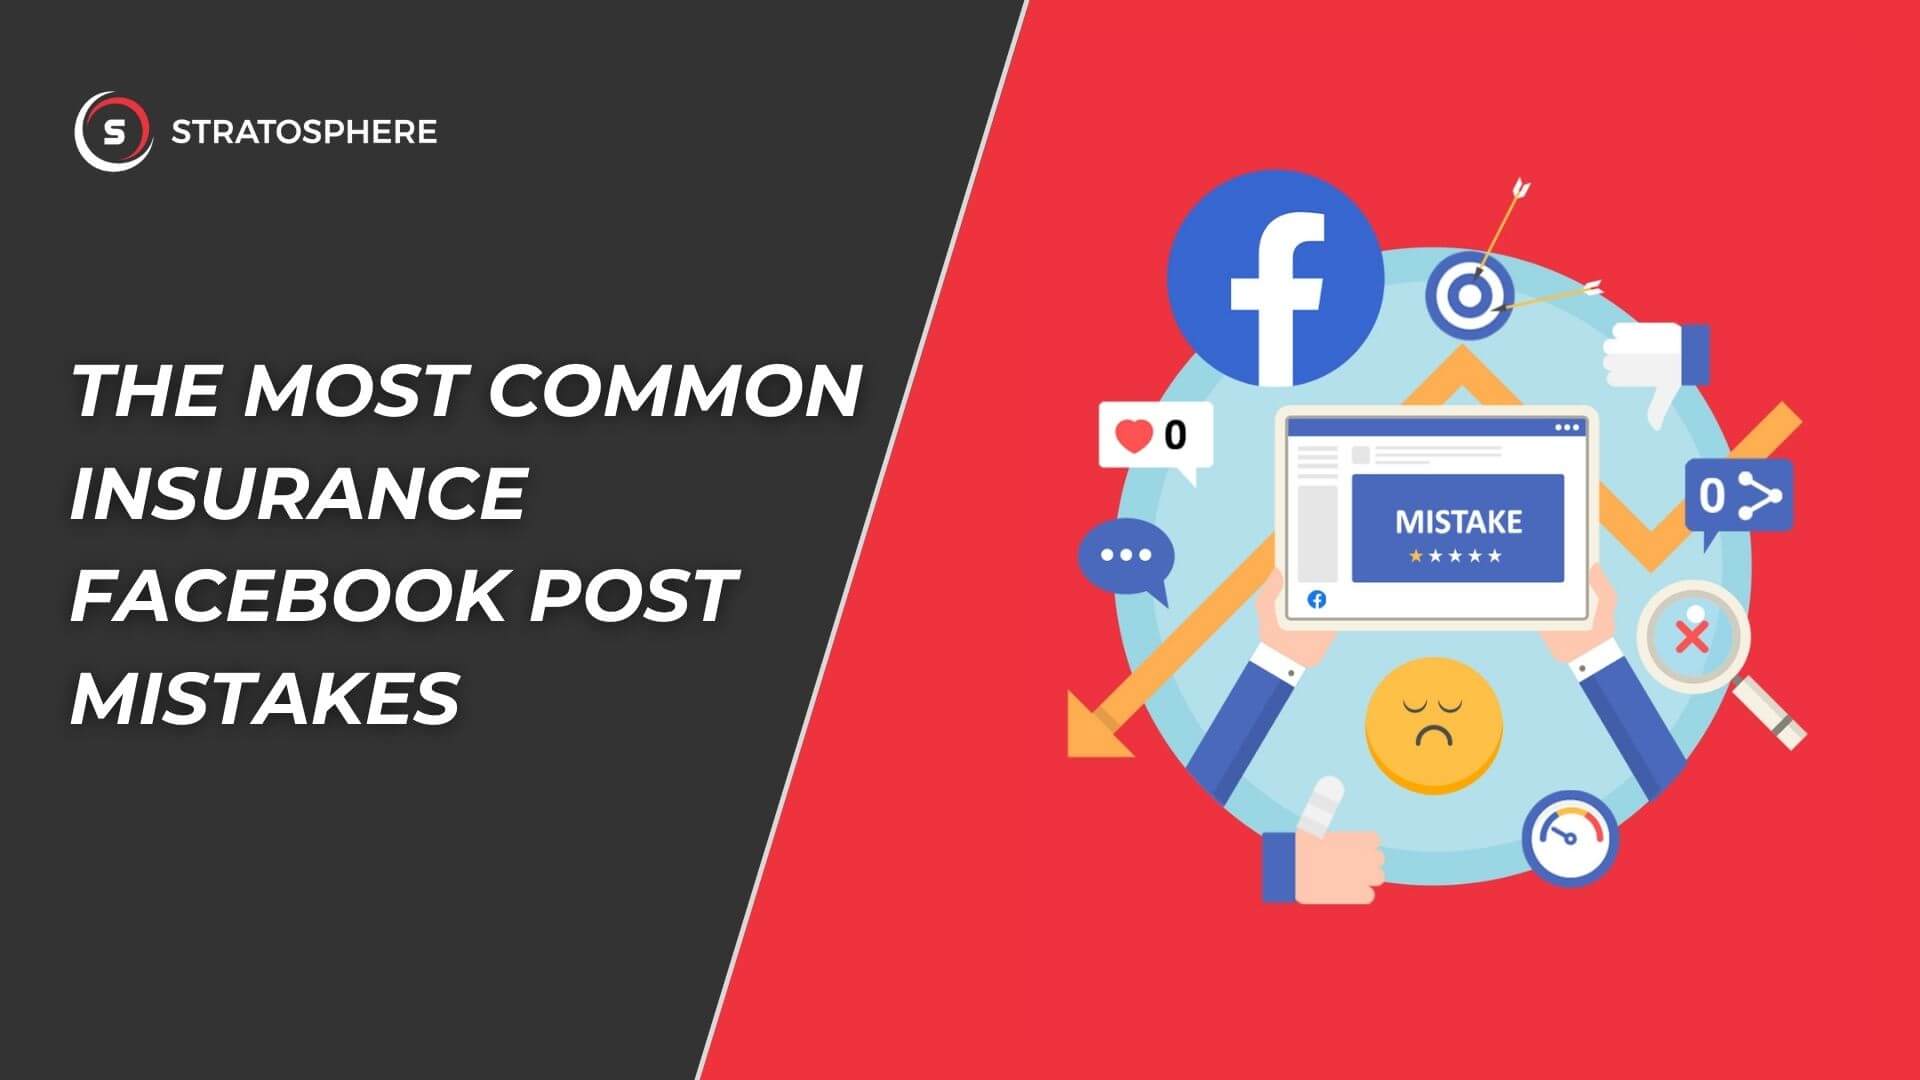 17 Common Insurance Facebook Post Mistakes & Tips to Avoid Them